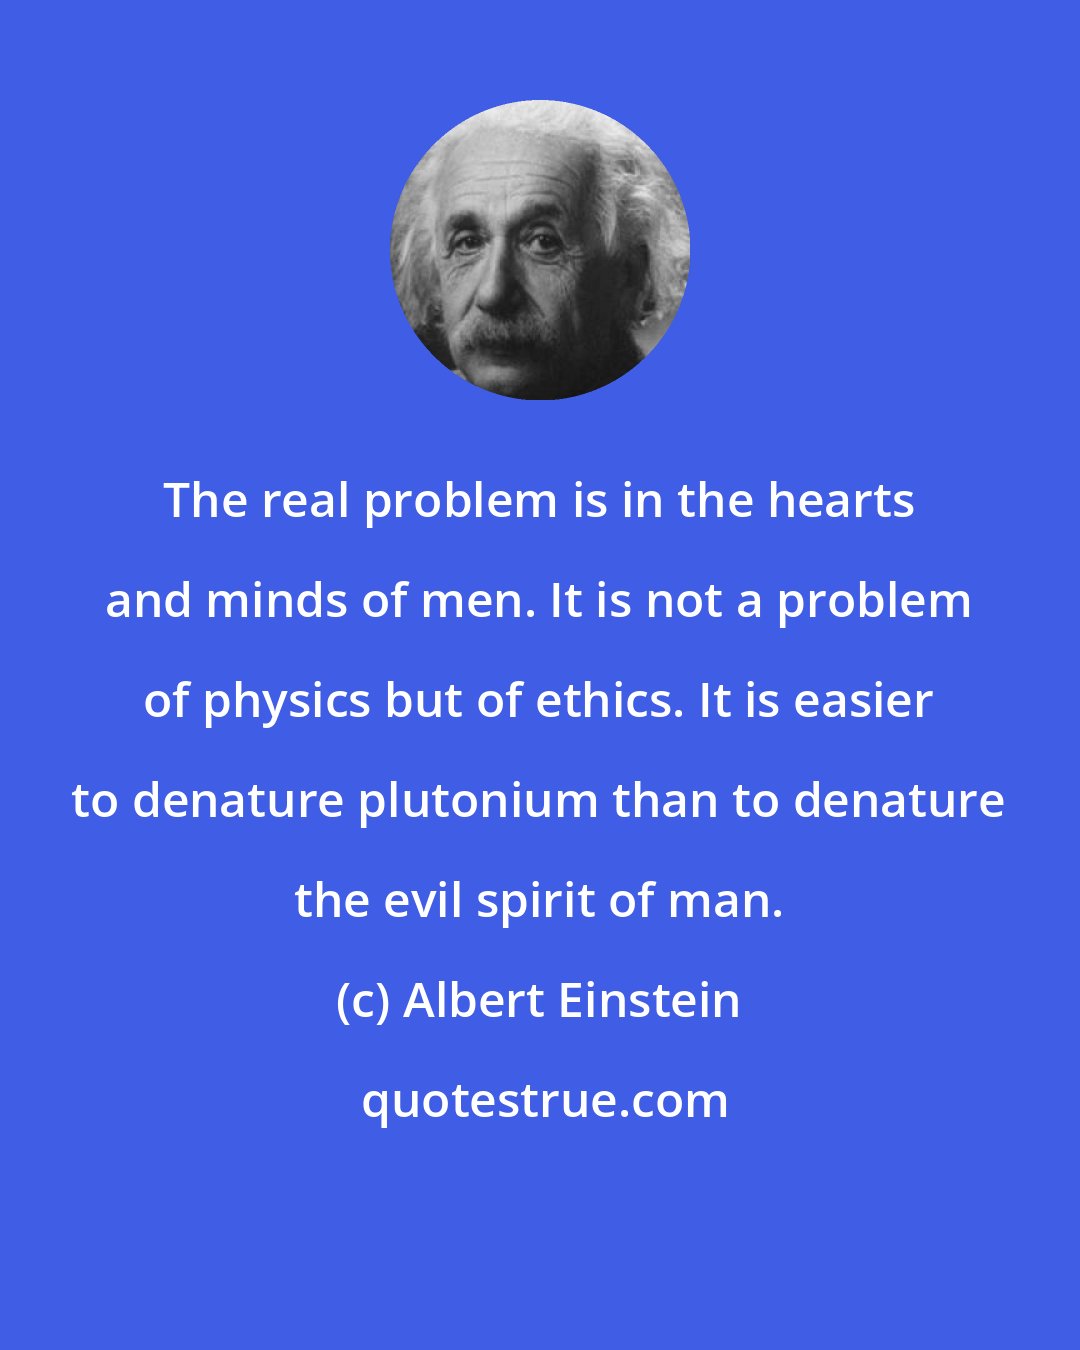 Albert Einstein: The real problem is in the hearts and minds of men. It is not a problem of physics but of ethics. It is easier to denature plutonium than to denature the evil spirit of man.